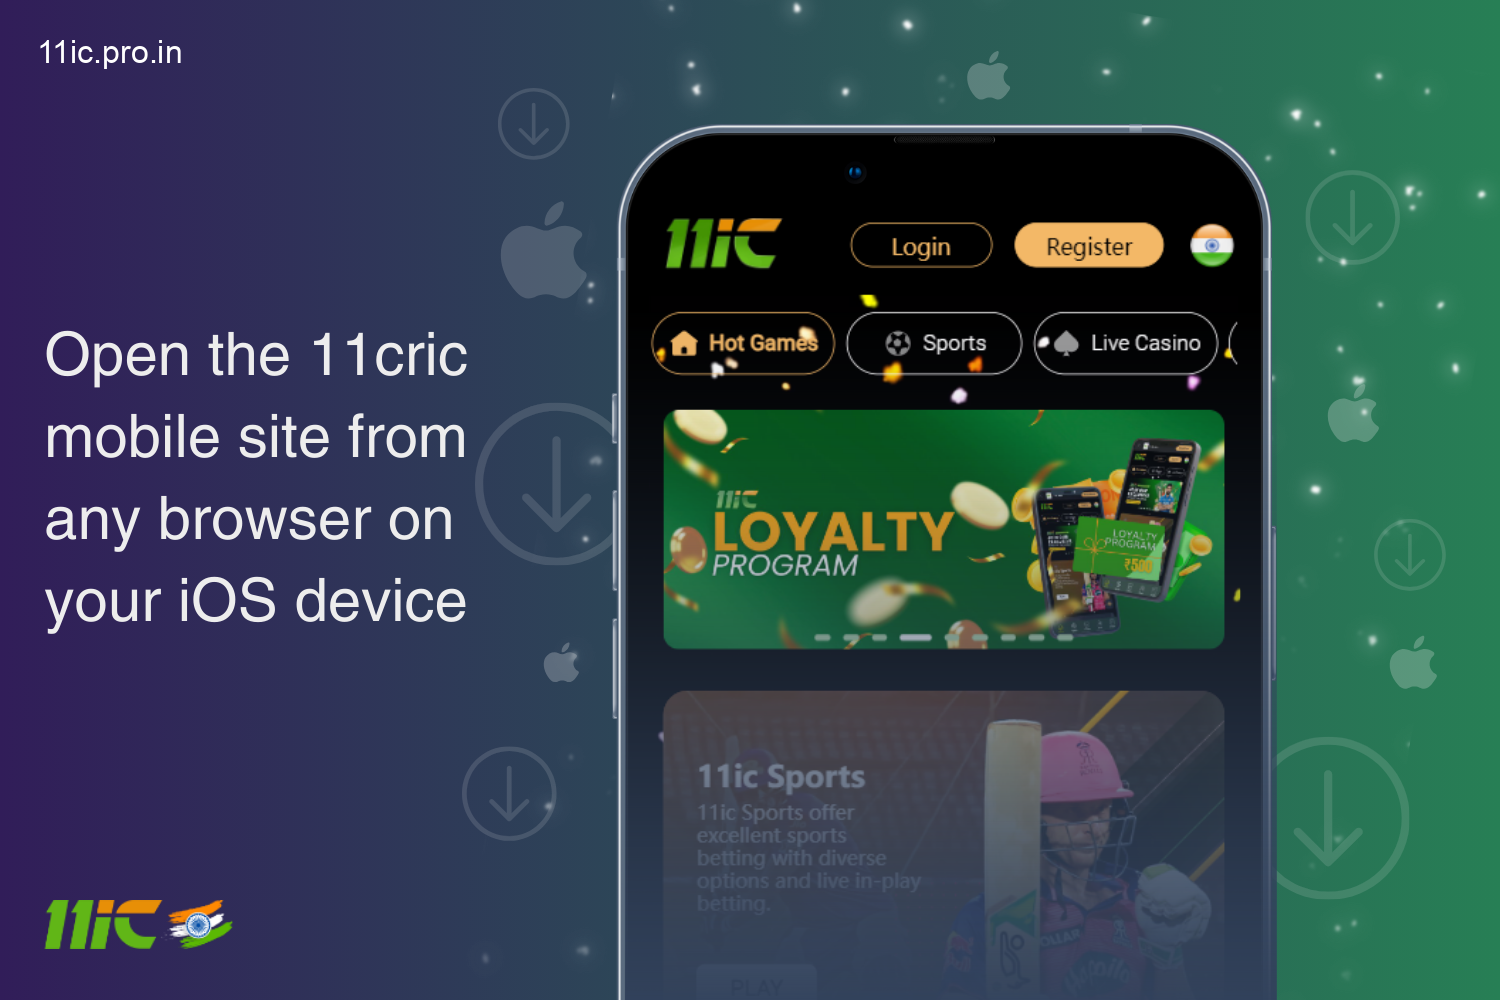 In order to download the 11ic app for iOS you should visit the official website from your iOS device